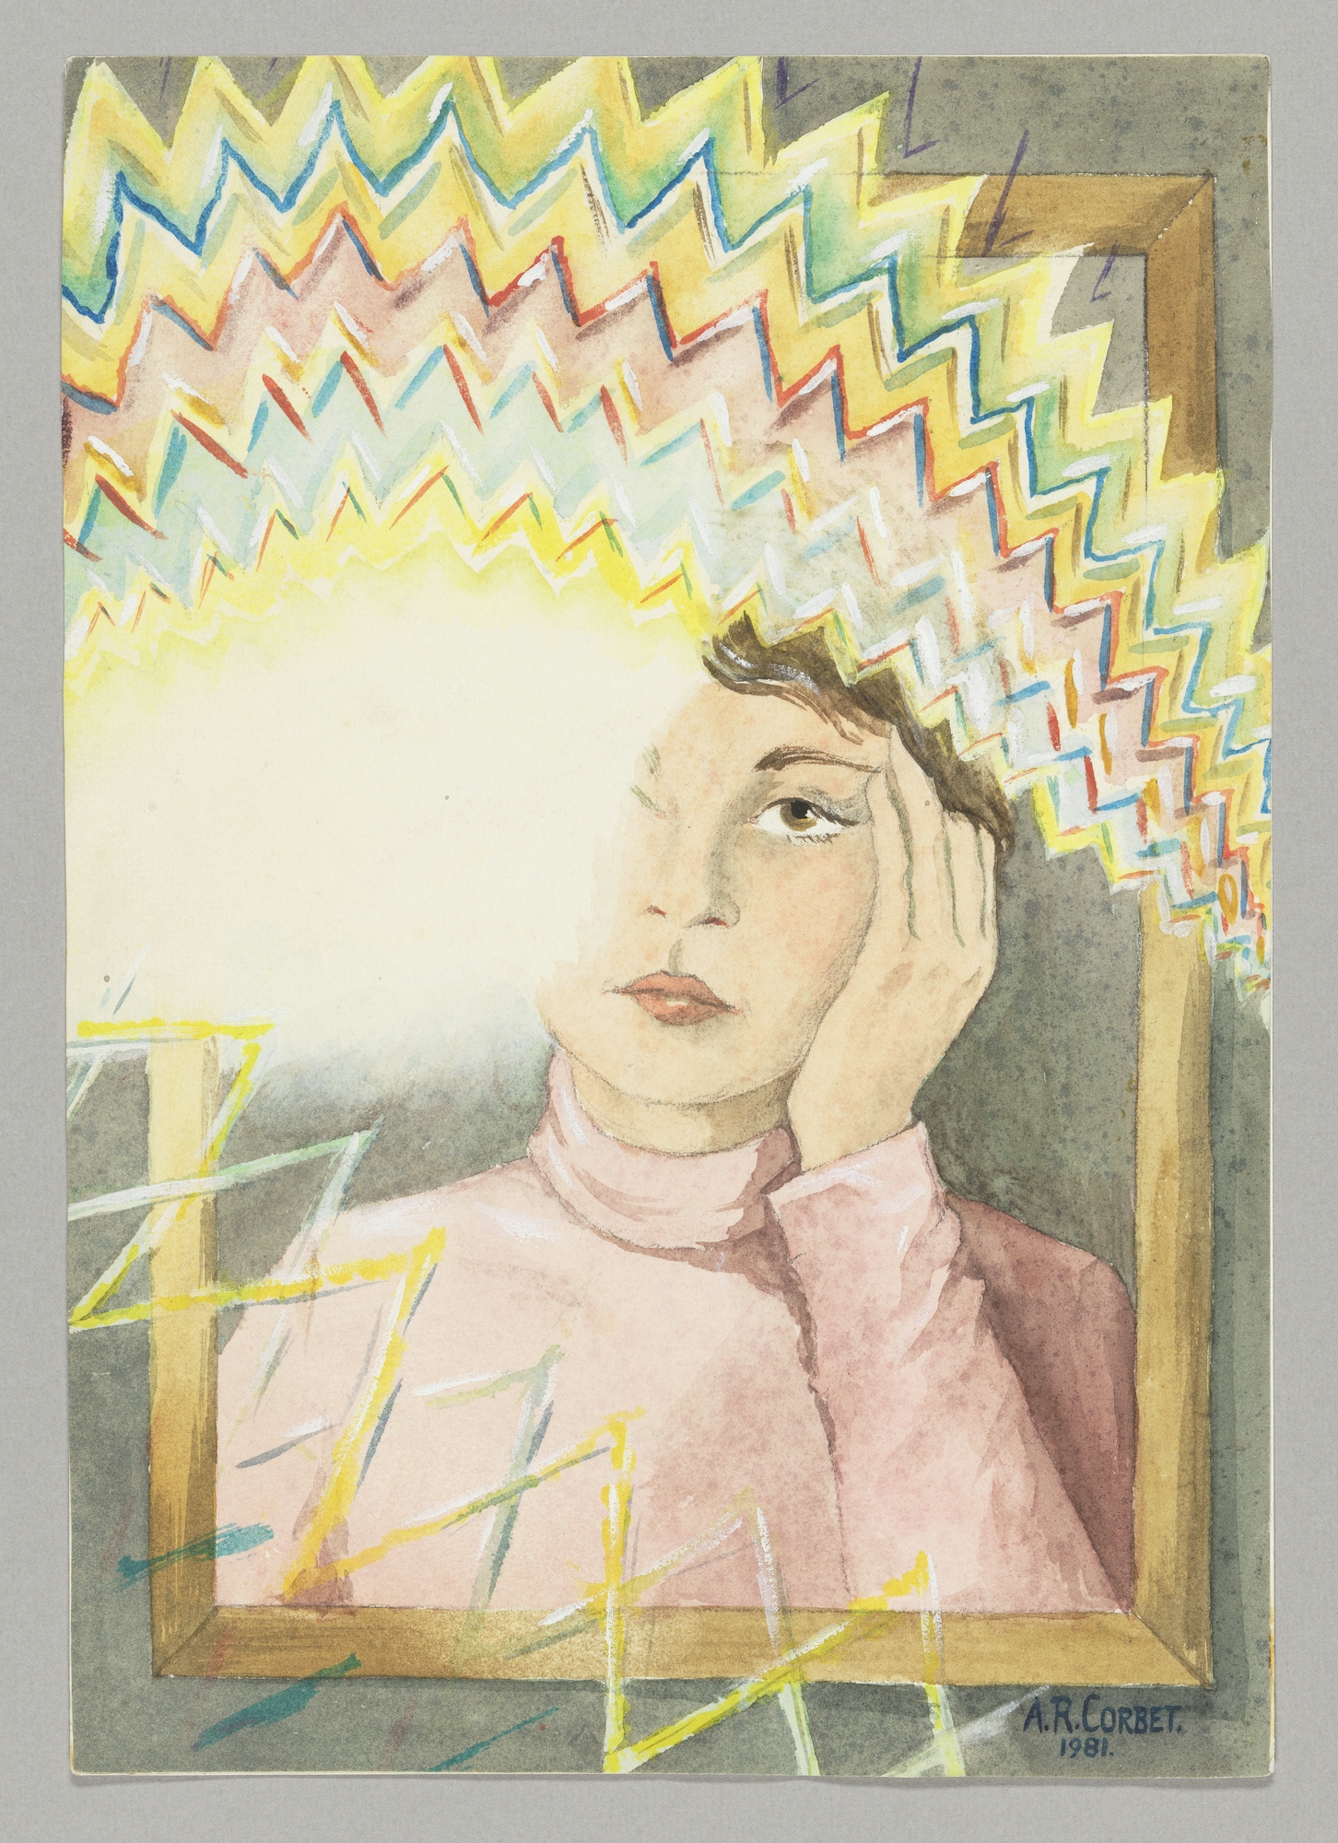 A woman's reflection looks out from a mirror at the viewre. The woman is waring a pink roll-neck jumper and her head rests against her left hand, just touching her short brown hair. The top third of the mirror is obscured by a strong multicoloured zigzag pattern across the image which just reaches the woman's forehead. Her right eye is blotted out by a bright white light that emerges from the zigzag pattern above. The woman's expression is resigned and unsmiling.